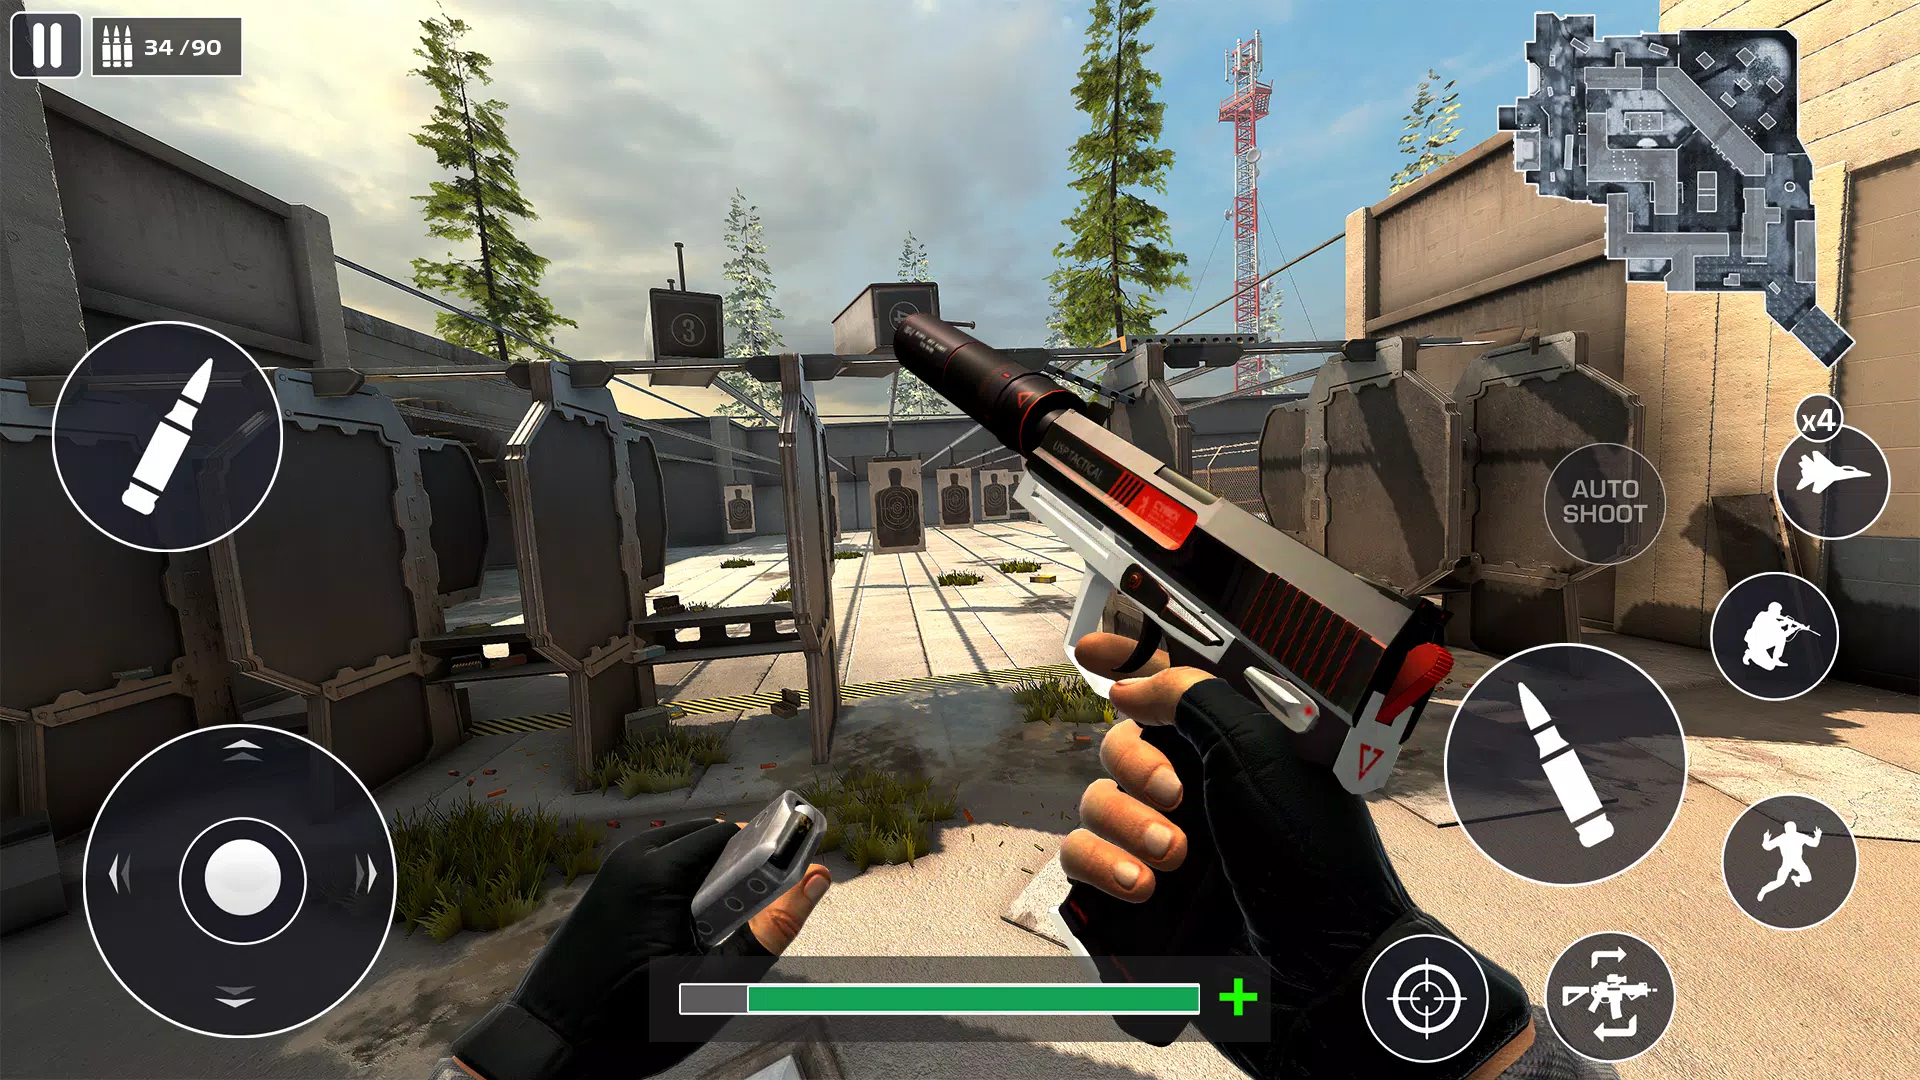 Call for War Gun Shooting Game - APK Download for Android